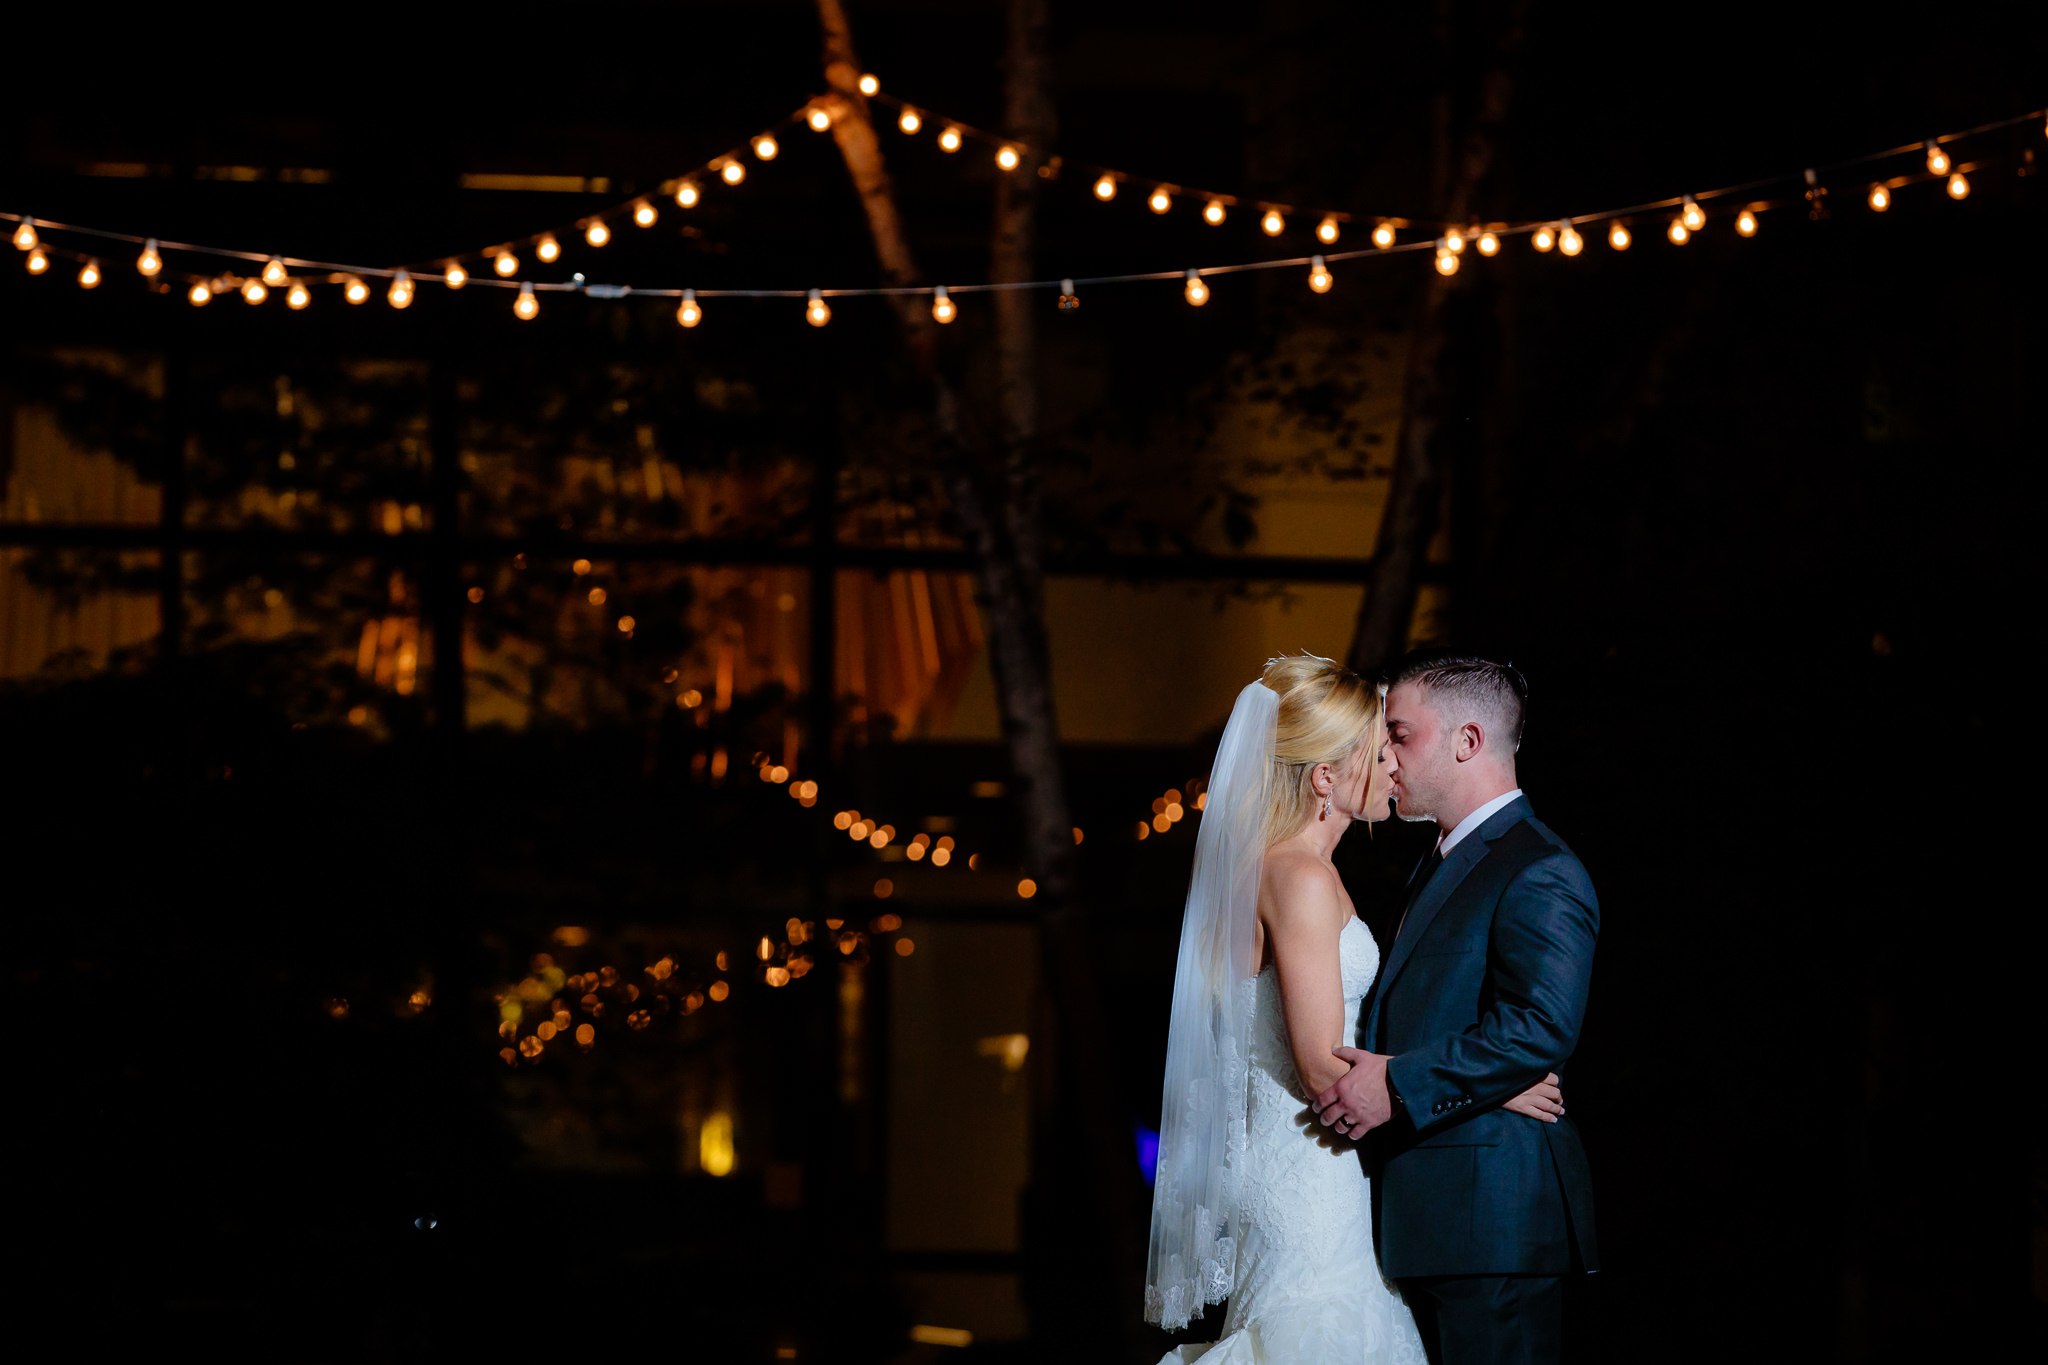 Bride and groom kiss under string lights at night in the Pittsburgh Airport Marriott courtyard